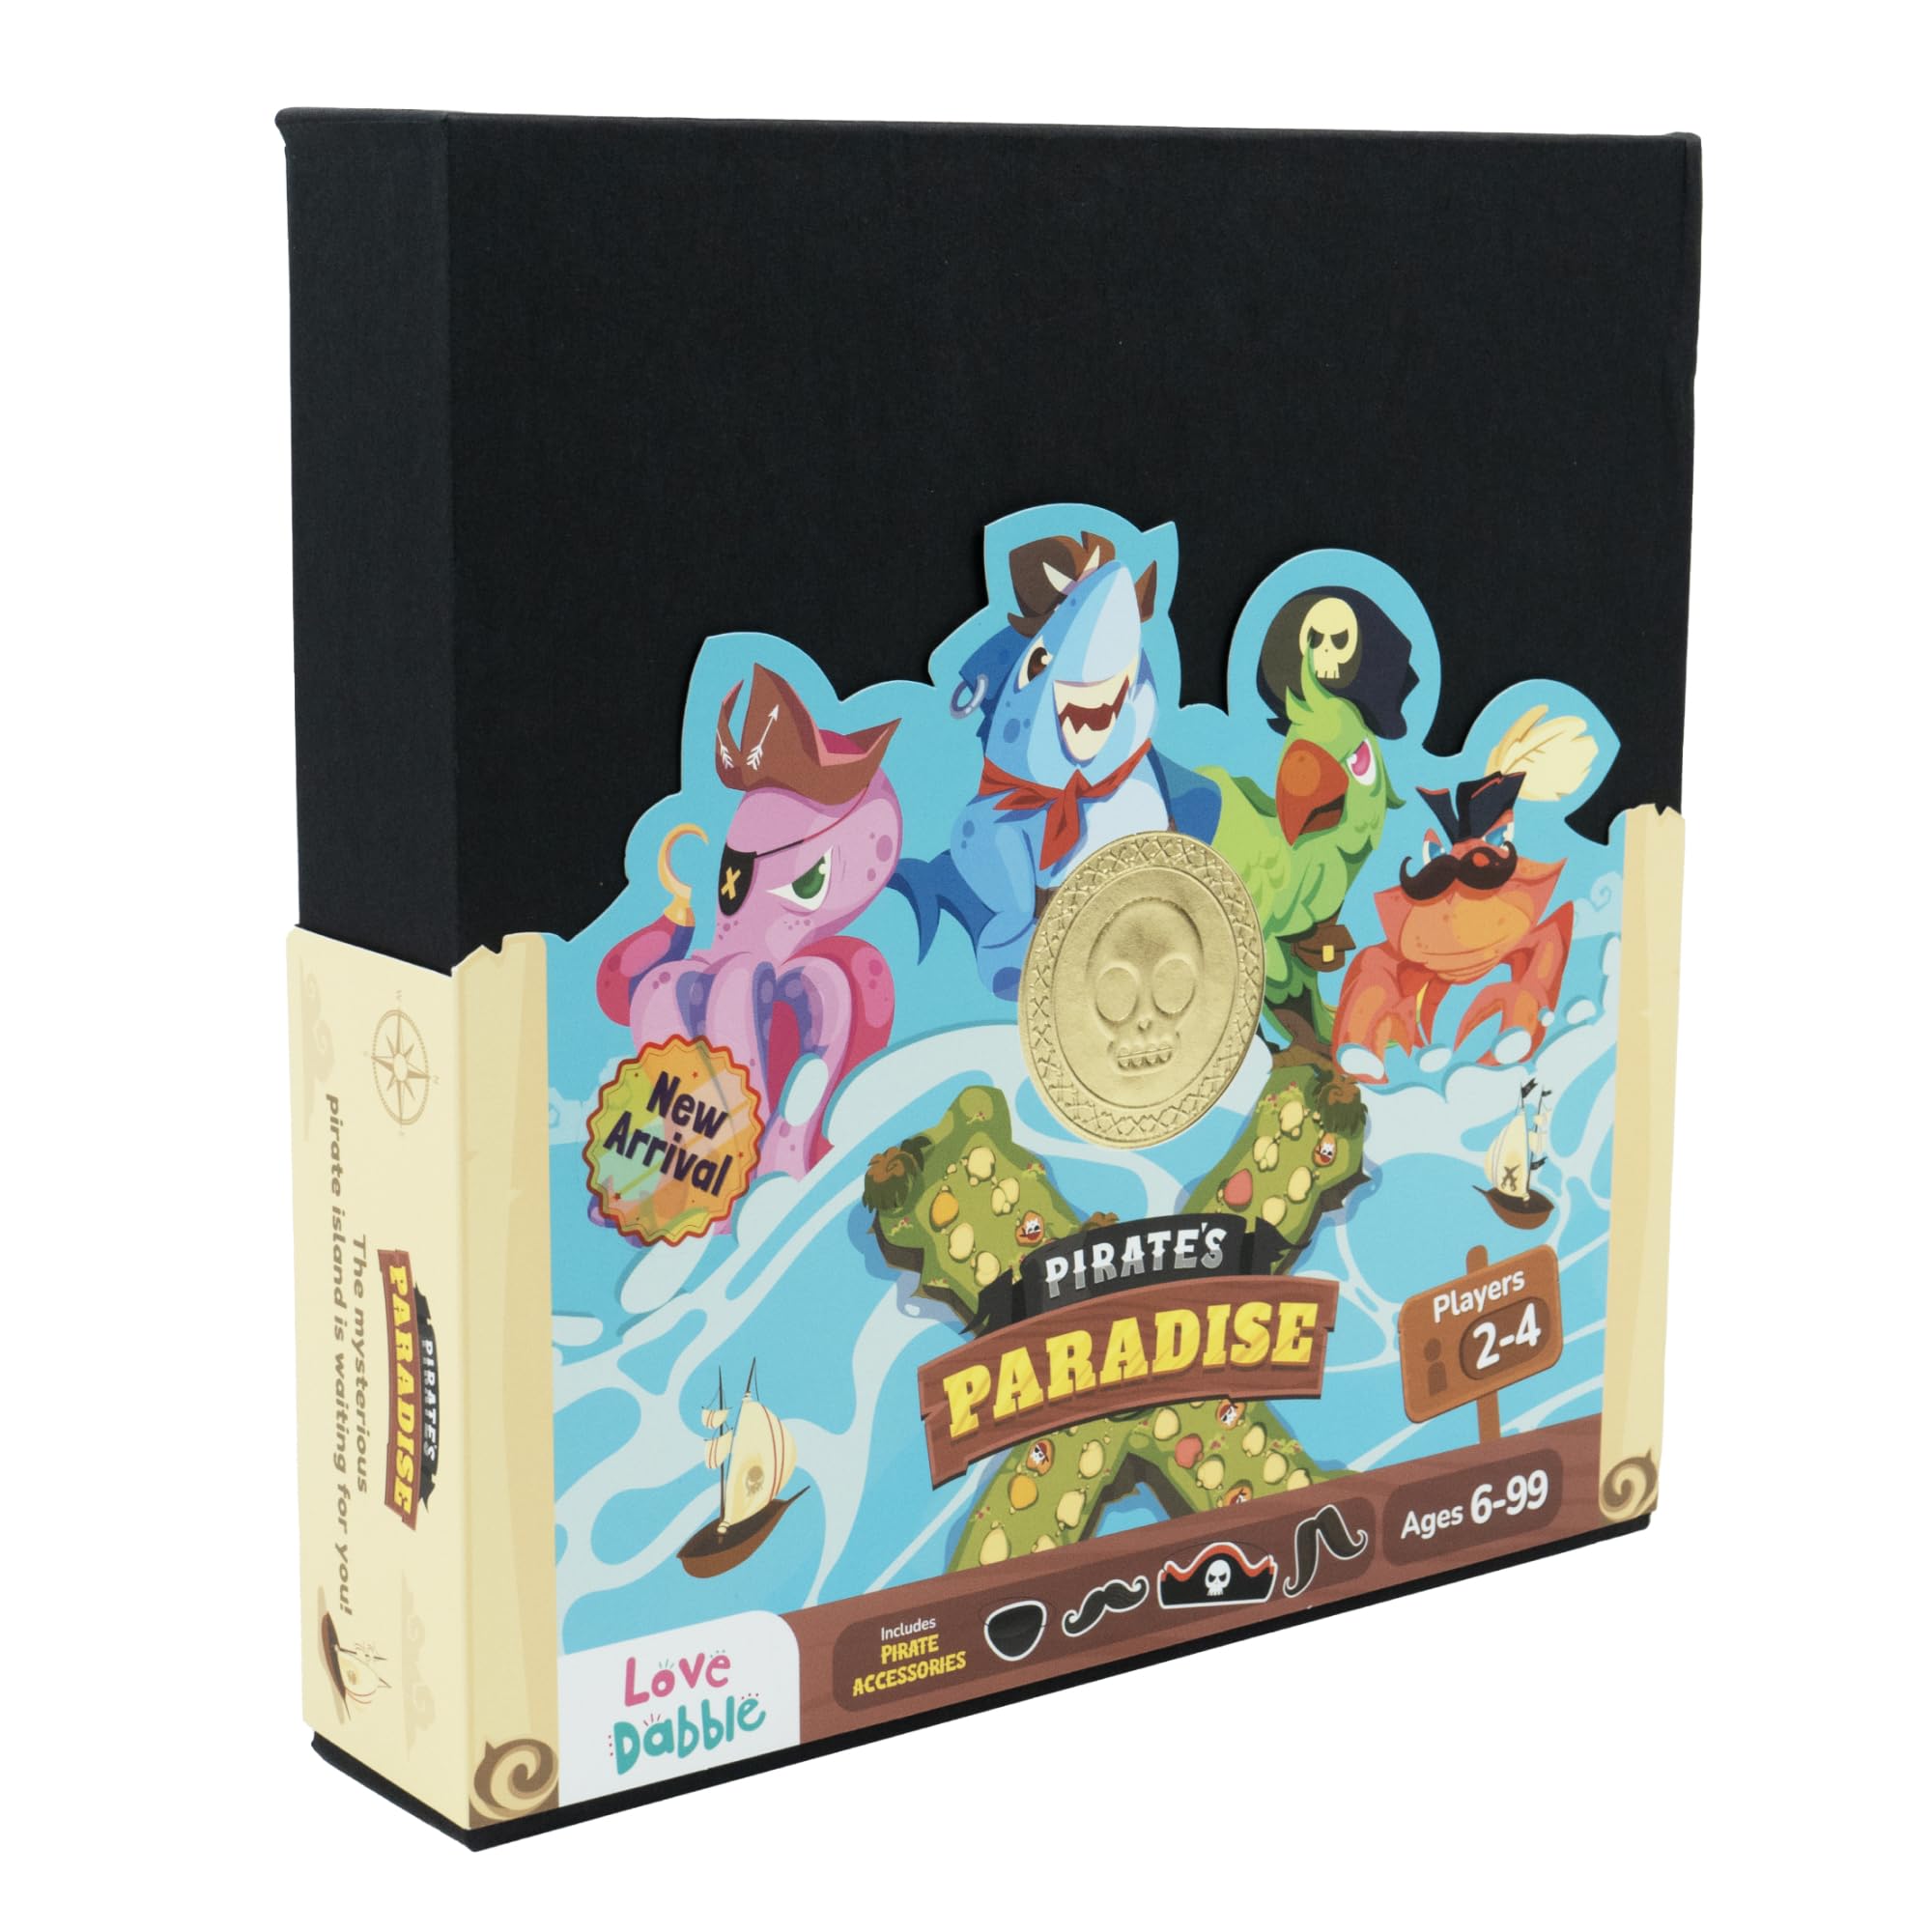 Board Games for Kids and Adult Pirate's Paradise - LoveDabble Board Games for Family Night Multi Player Board Games for Family and Friends Birthday Gift for Girls and Boys